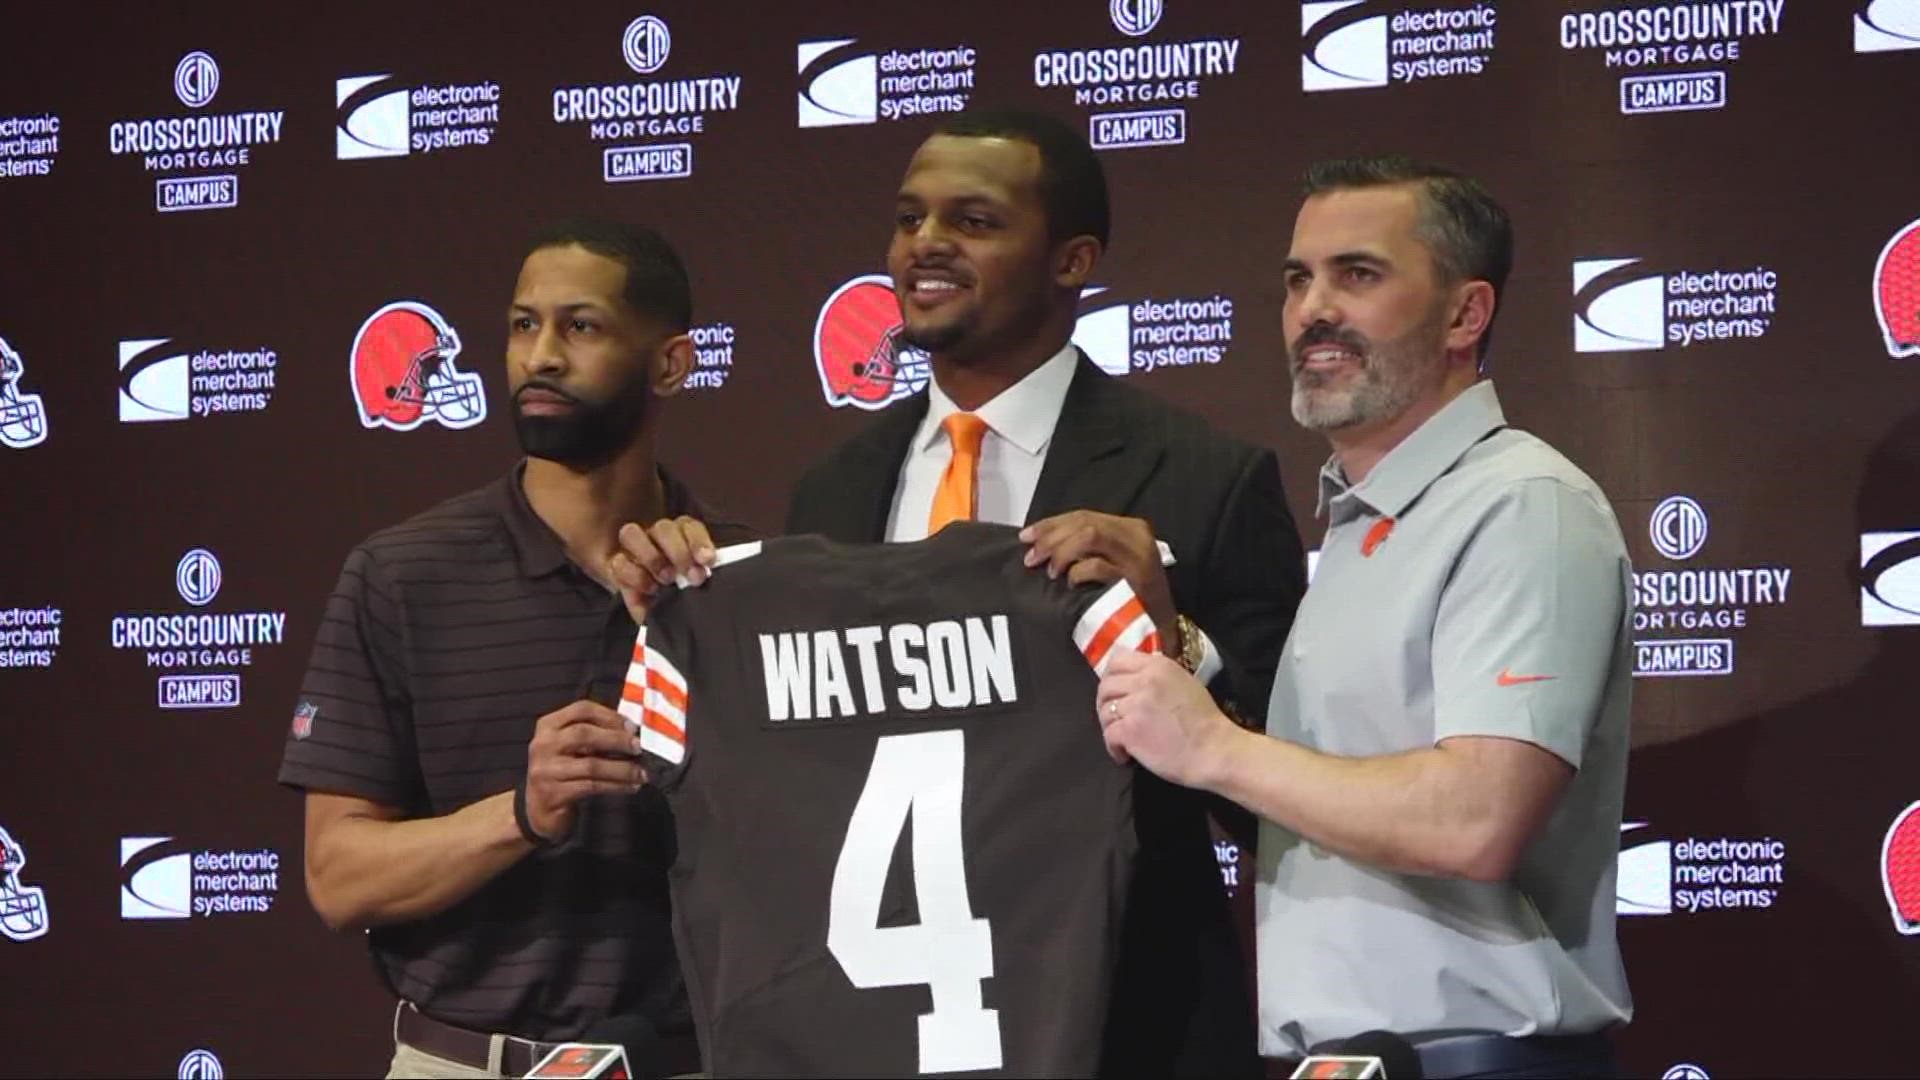 According to court documents, the civil cases leveled against Deshaun Watson will not go to trial during the upcoming NFL season.